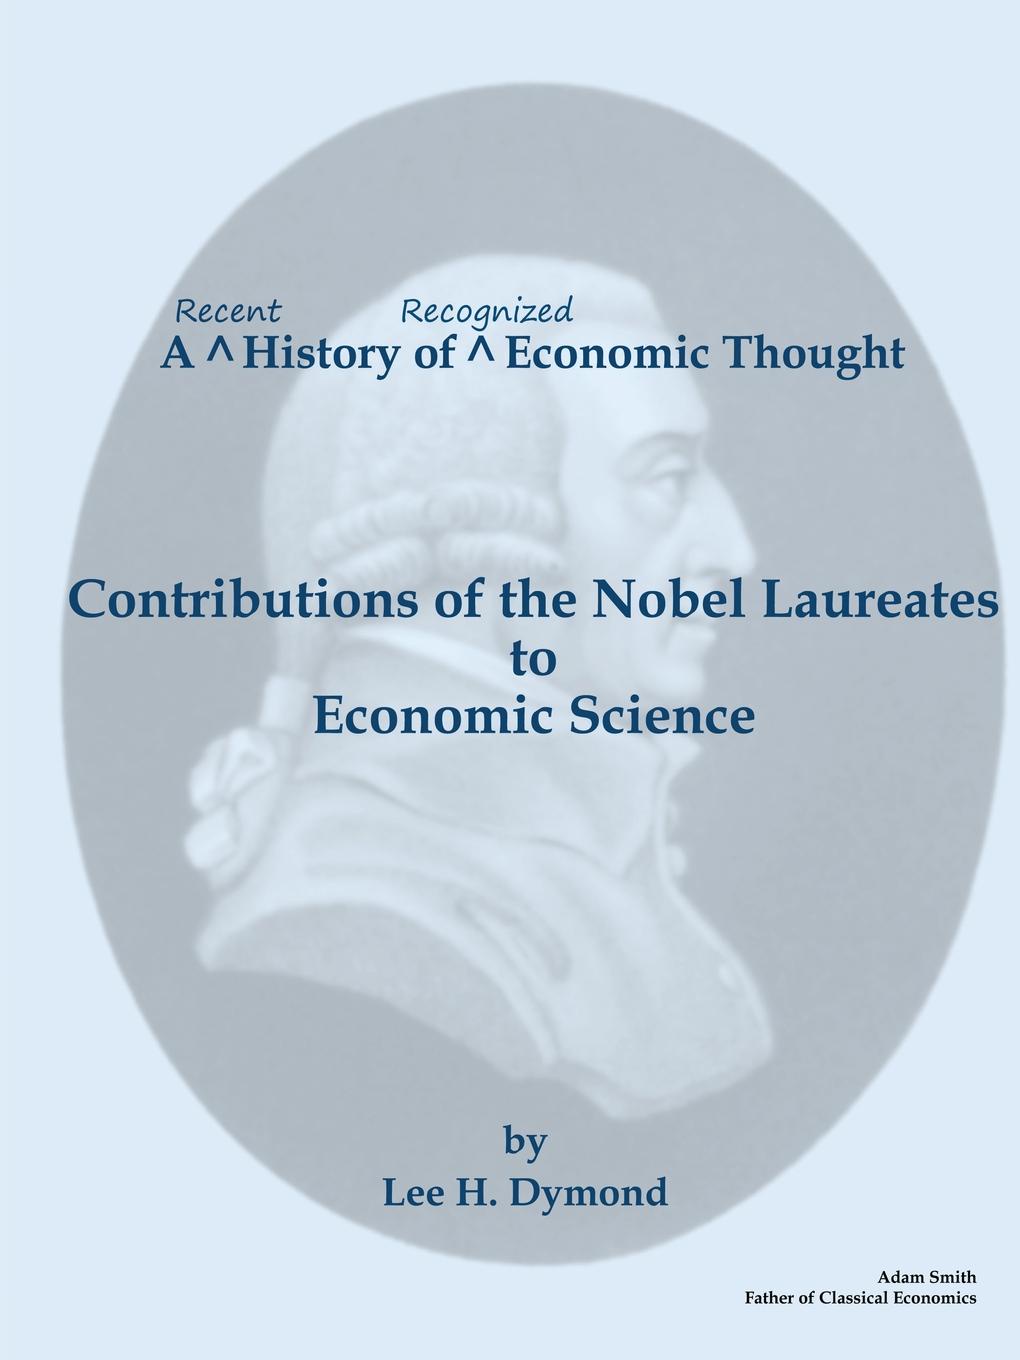 Lee H. Dymond A Recent History of Recognized Economic Thought. Contributions of the Nobel Laureates to Economic Science